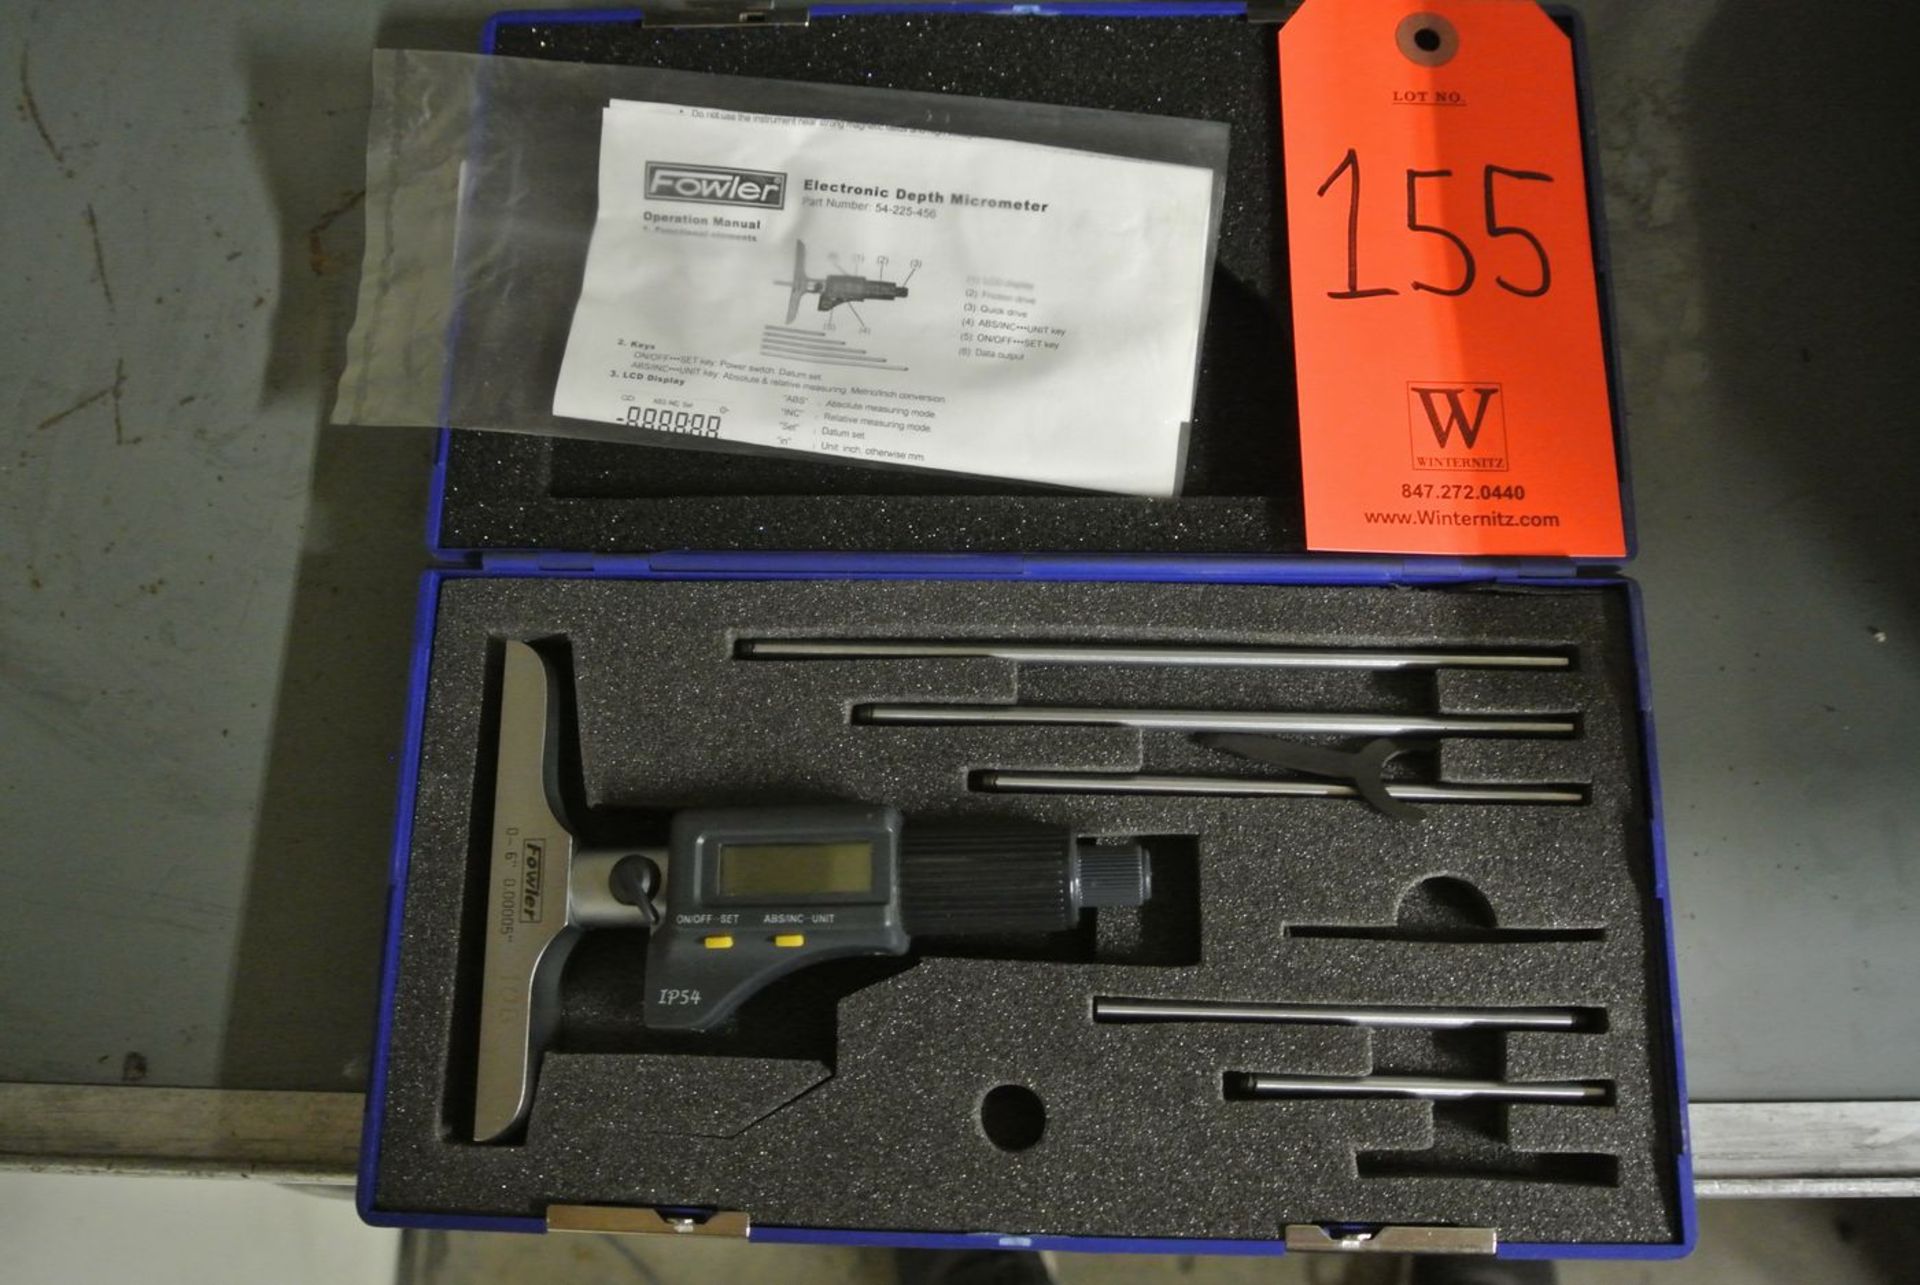 Fowler IP54 Electronic Depth Micrometer; 0-6", 0.00005, with Case